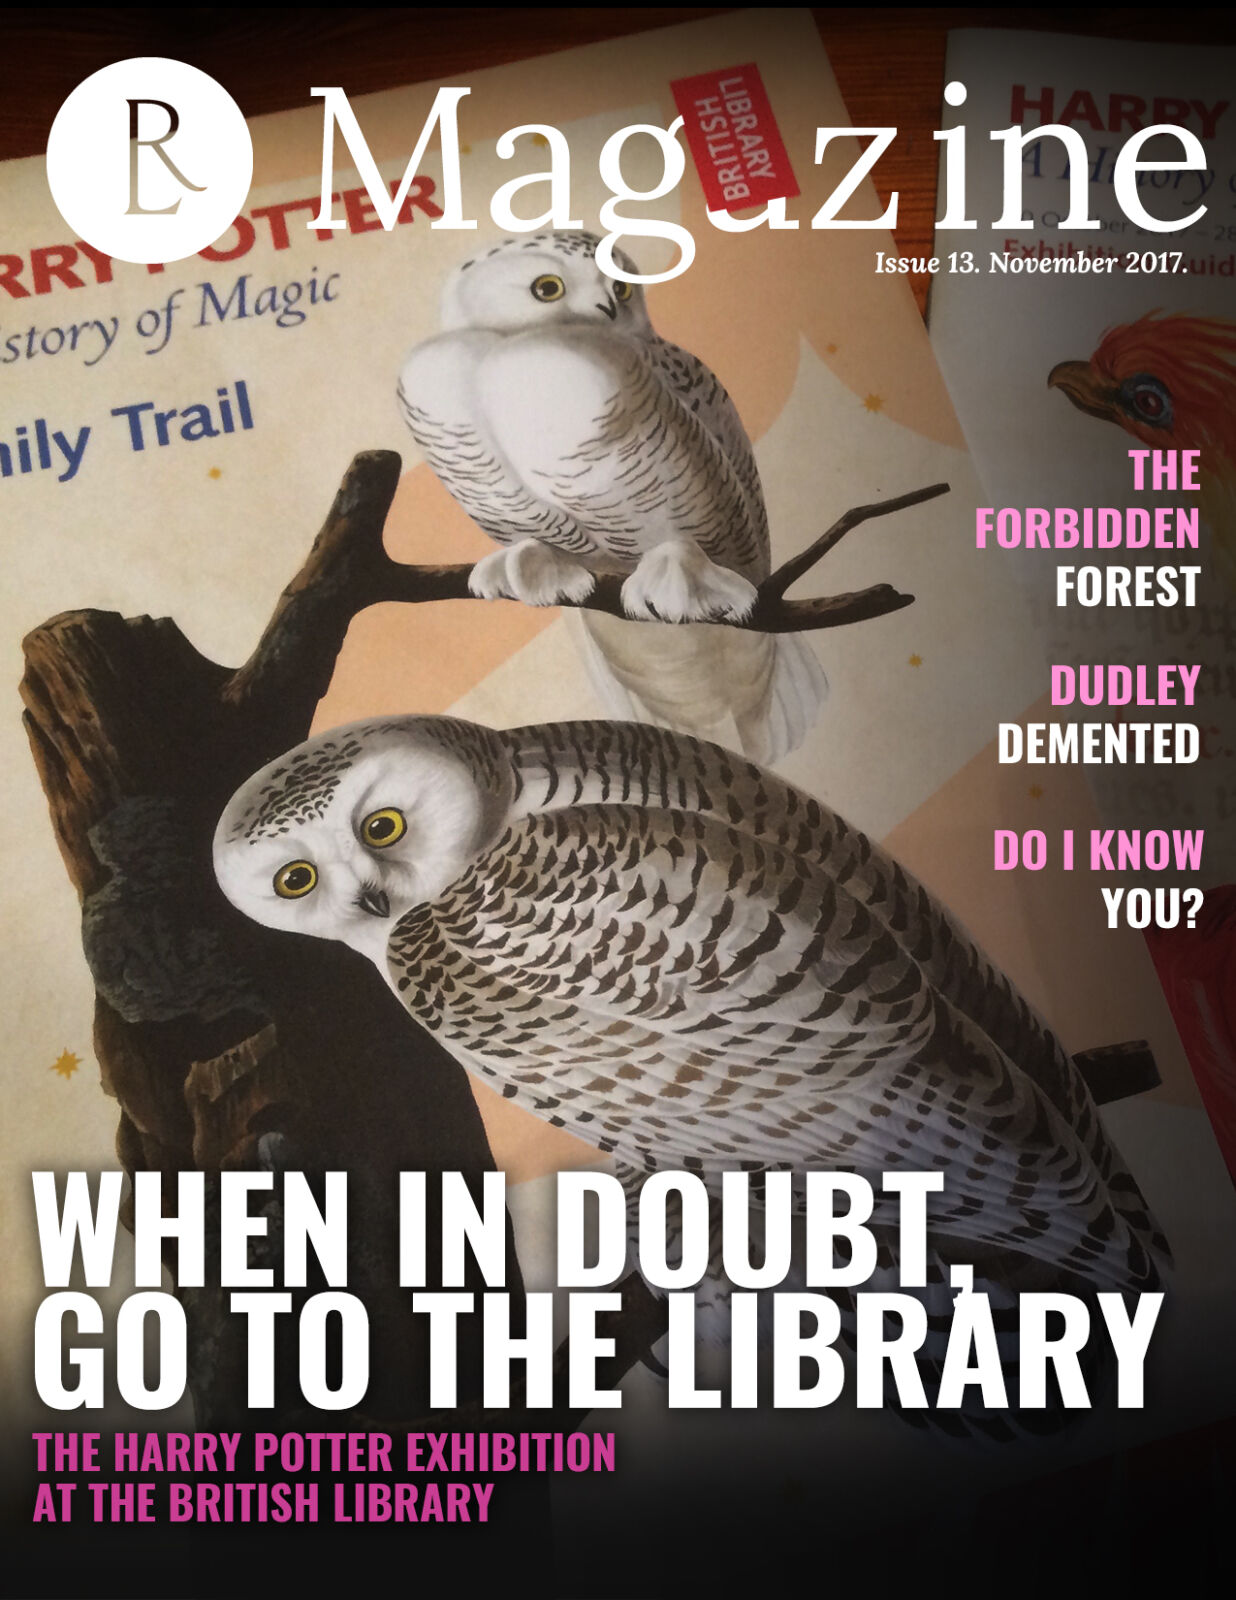 The Rowling Library Magazine #13 (November 2017): When in doubt, go to the Library